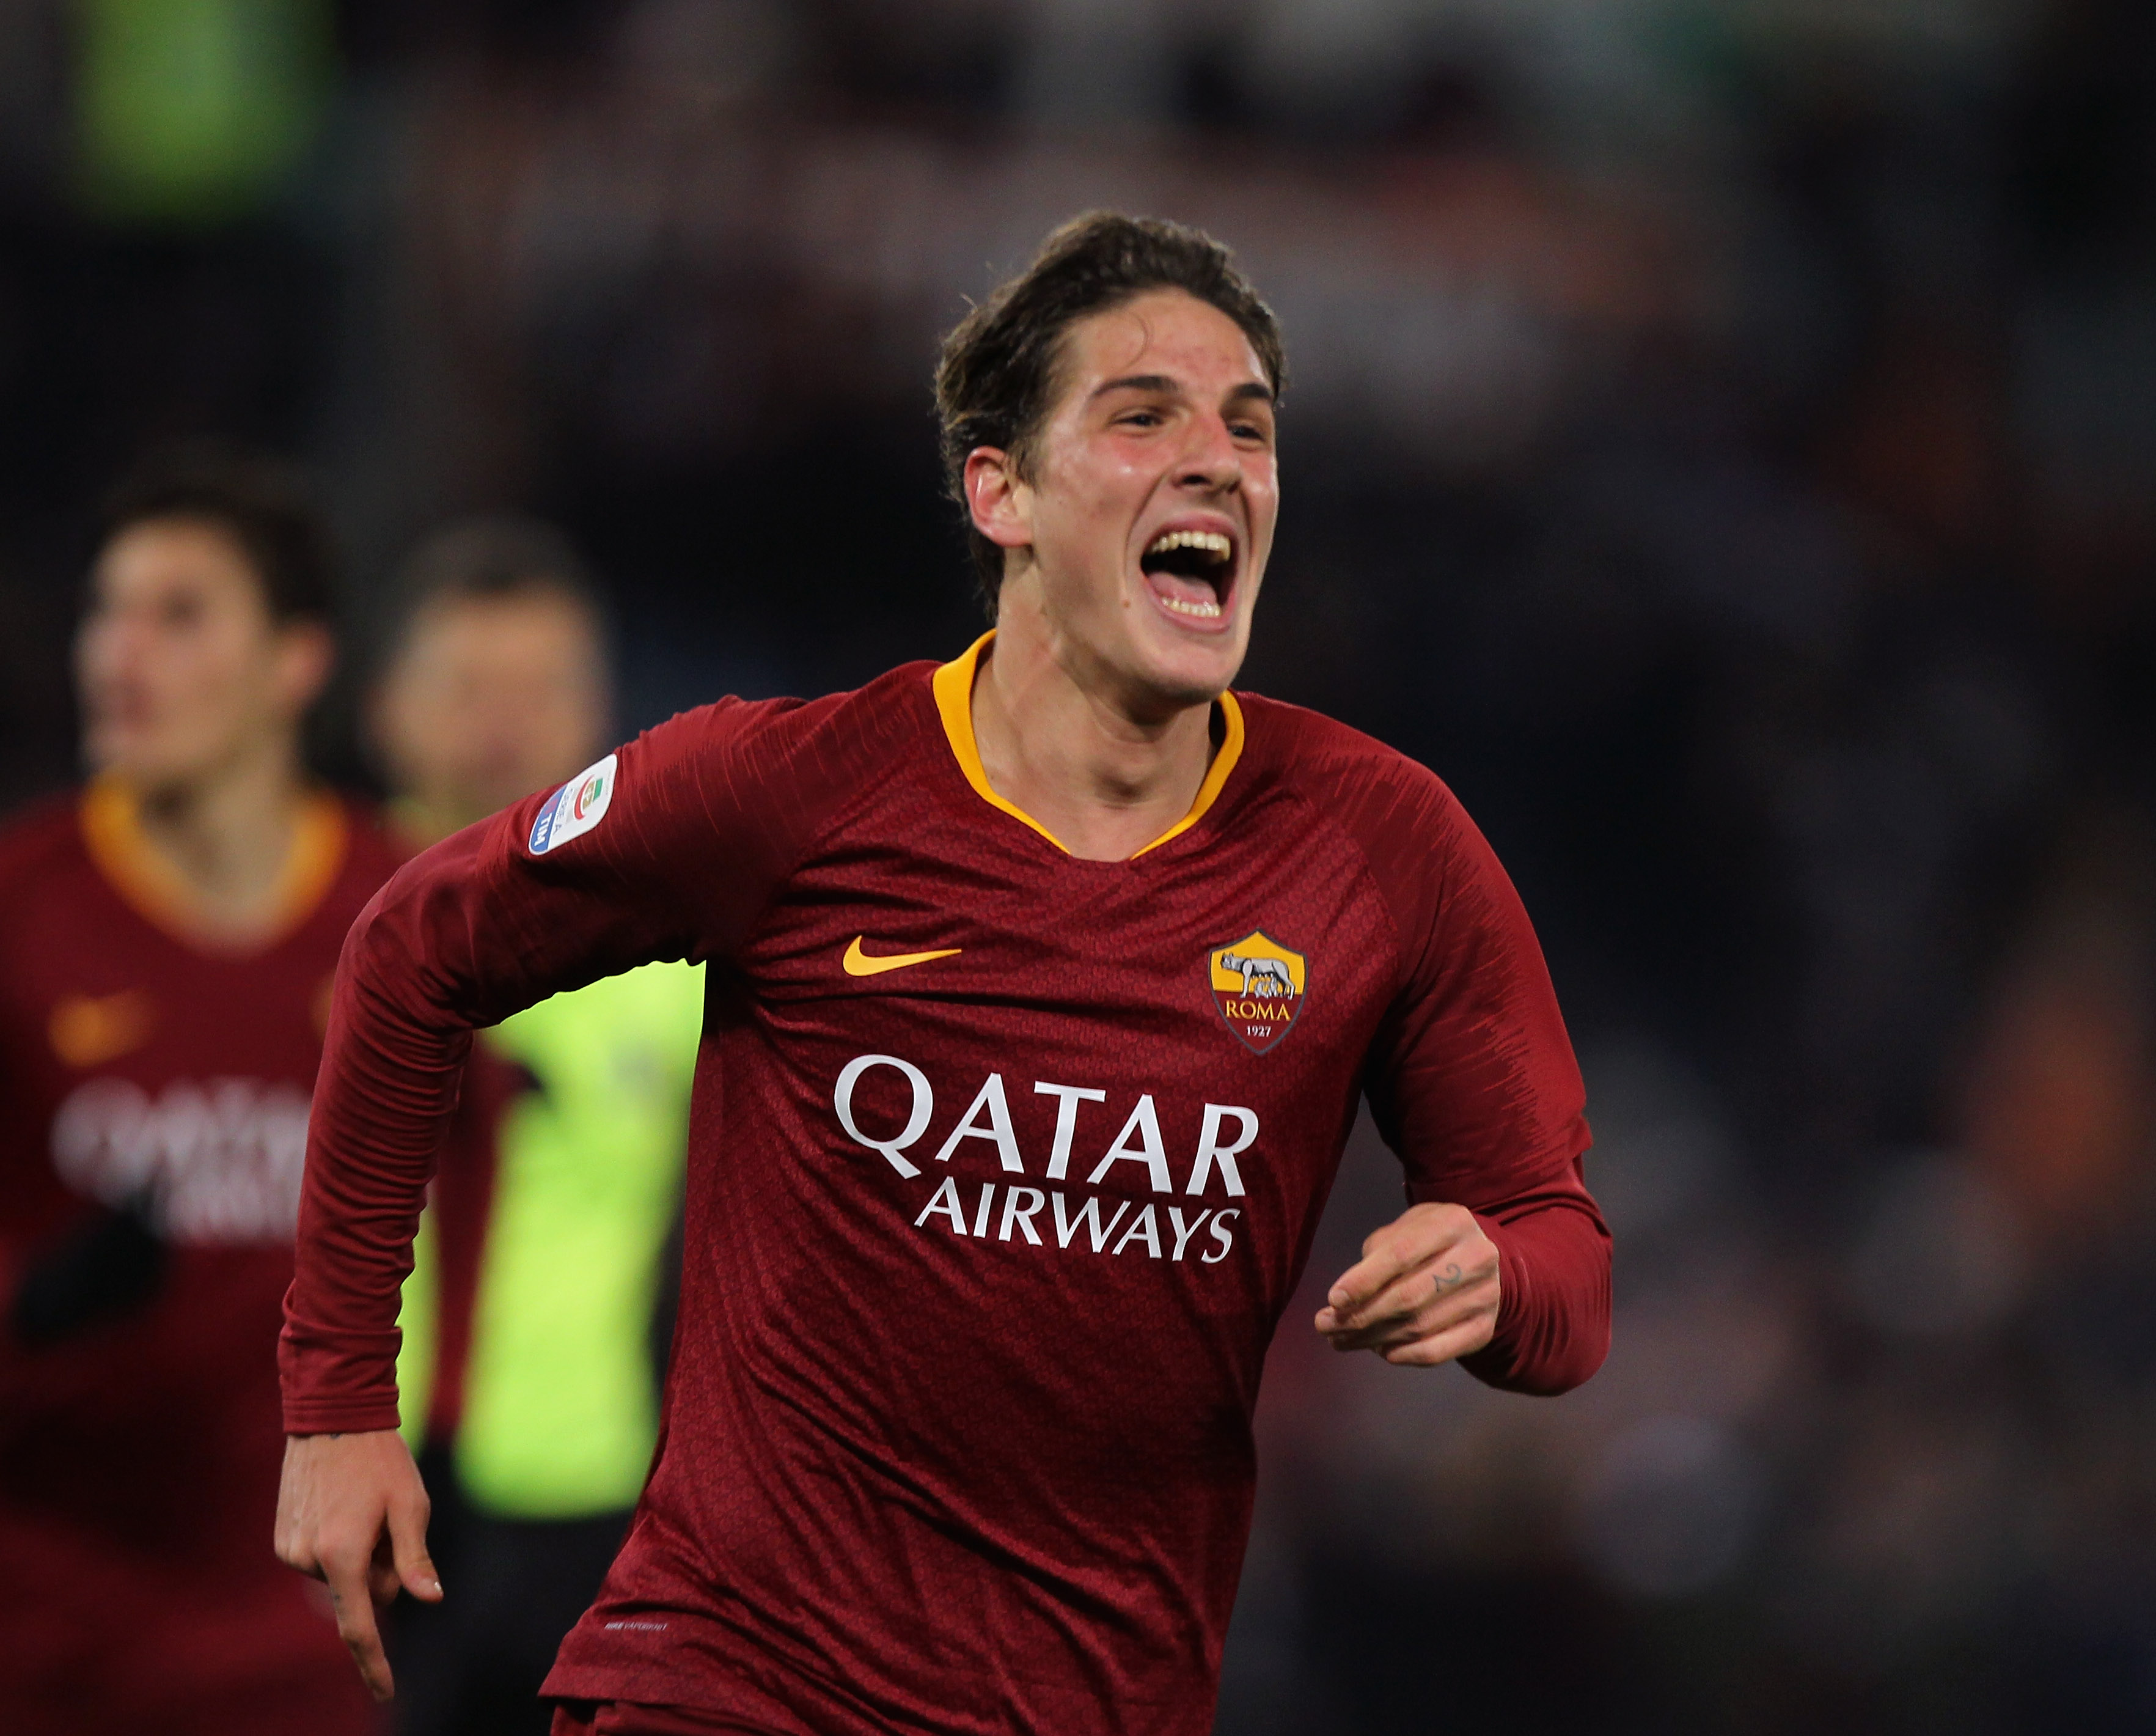 ROME, ITALY - DECEMBER 26:  Nicolo' Zaniolo of AS Roma celebrates after scoring the team's third goal during the Serie A match between AS Roma and US Sassuolo at Stadio Olimpico on December 26, 2018 in Rome, Italy.  (Photo by Paolo Bruno/Getty Images)